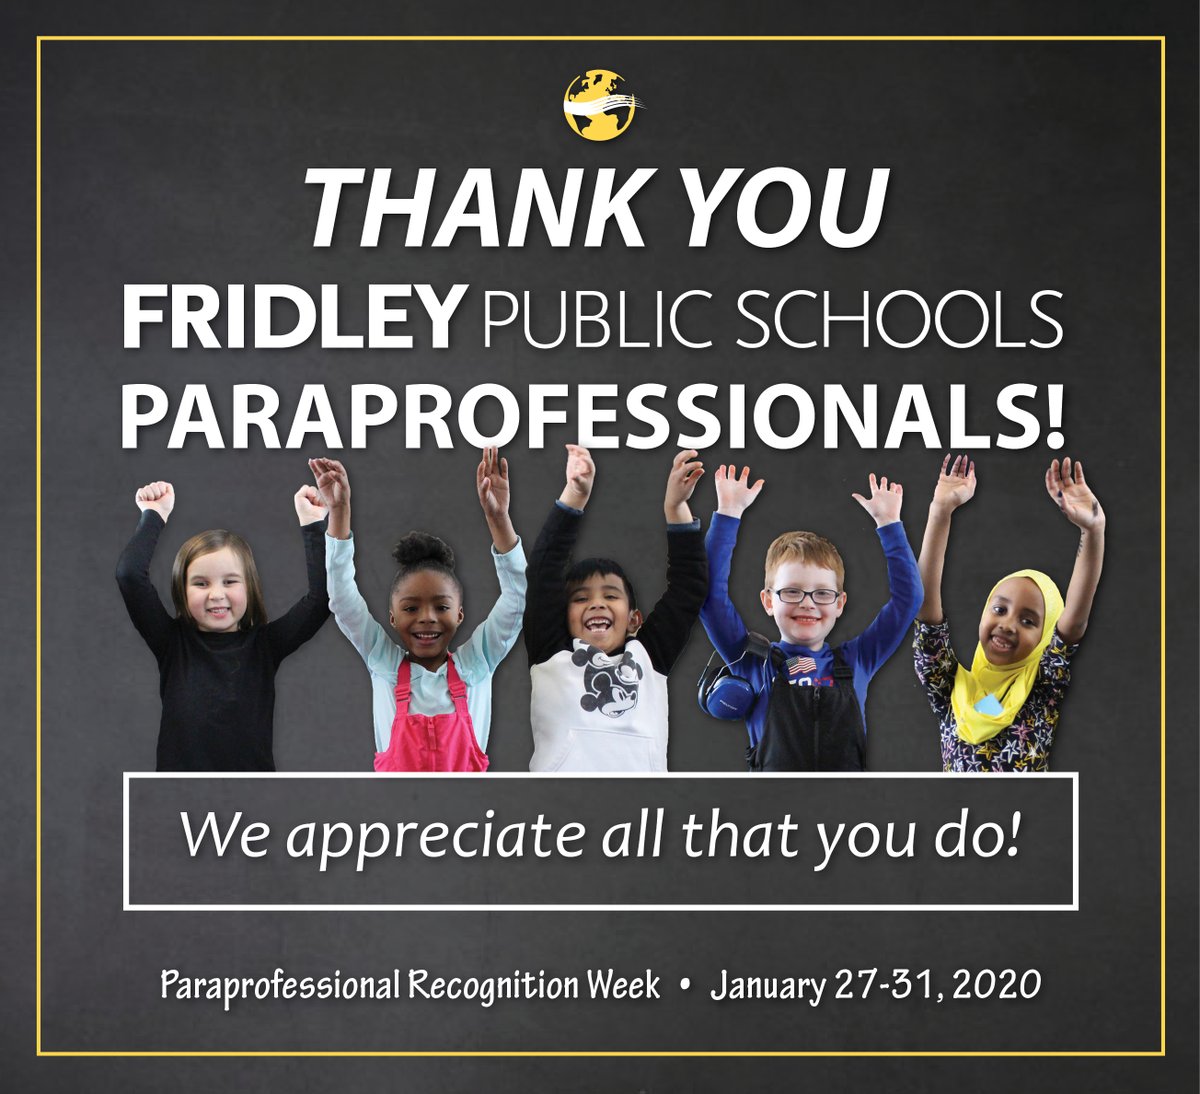 We’d like to give a big THANK YOU to all FPS paras! Your role is an integral part of student achievement and success – and your work and contributions are appreciated. Please take the time to #thankapara this week! #ThankYouParaprofessionals #ParaprofessionalRecognitionWeek